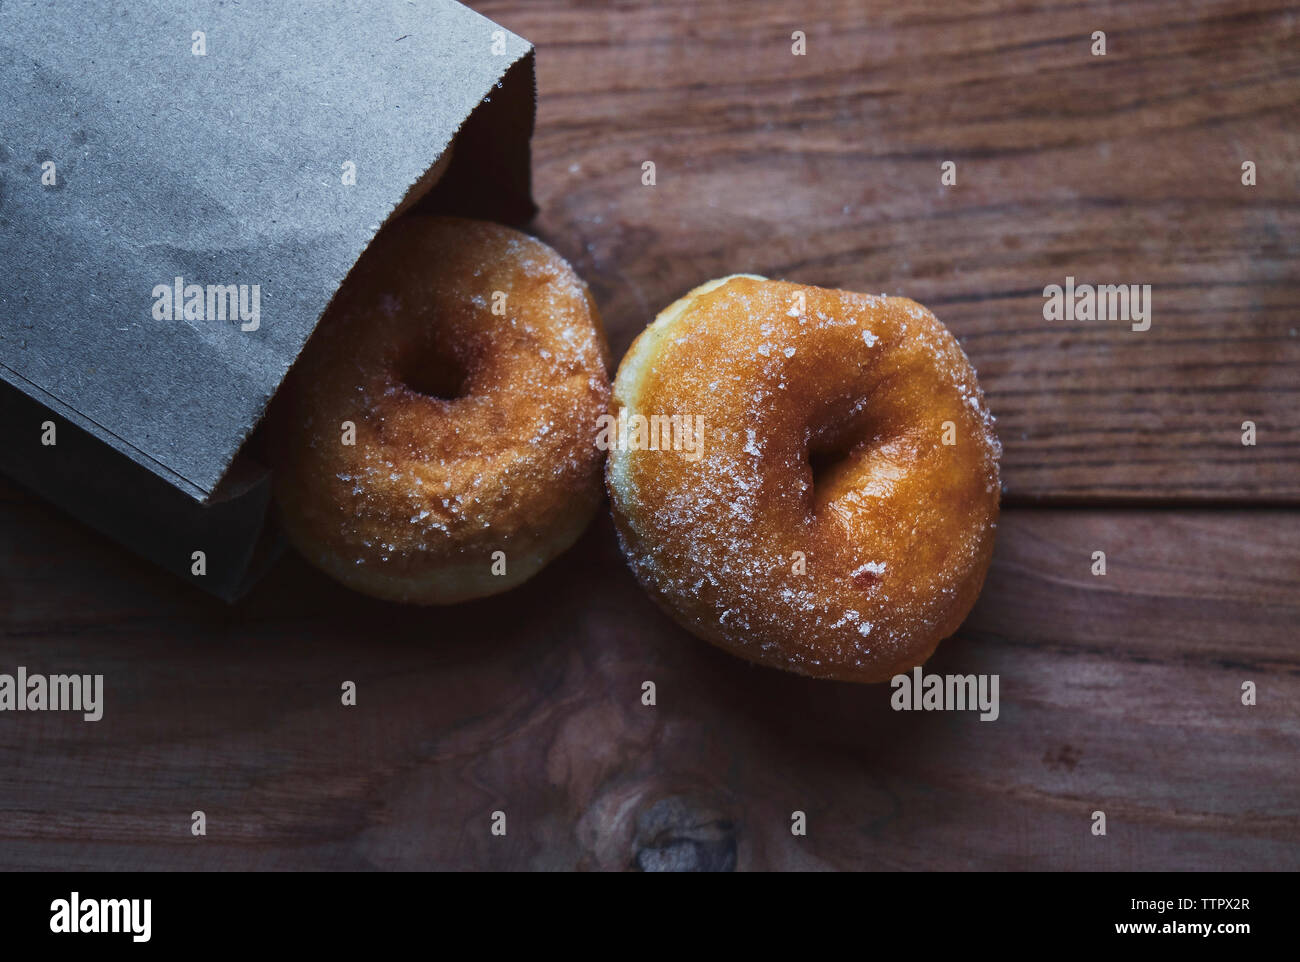 High angle view of donuts by paper bag on table Stock Photo